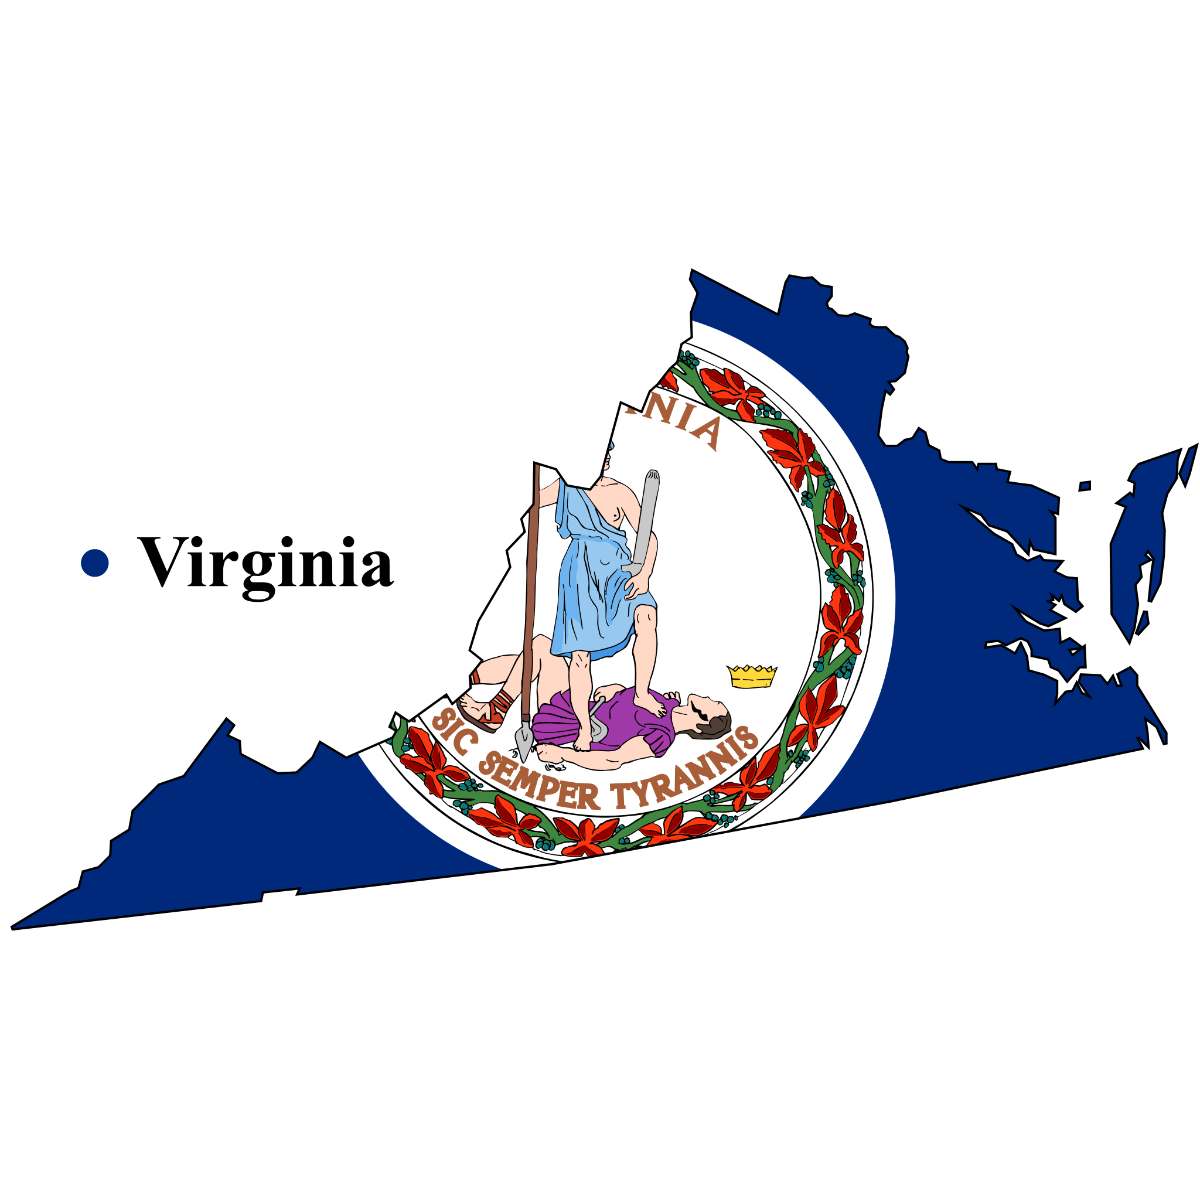 Virginia State map cutout with Virginia flag superimposed